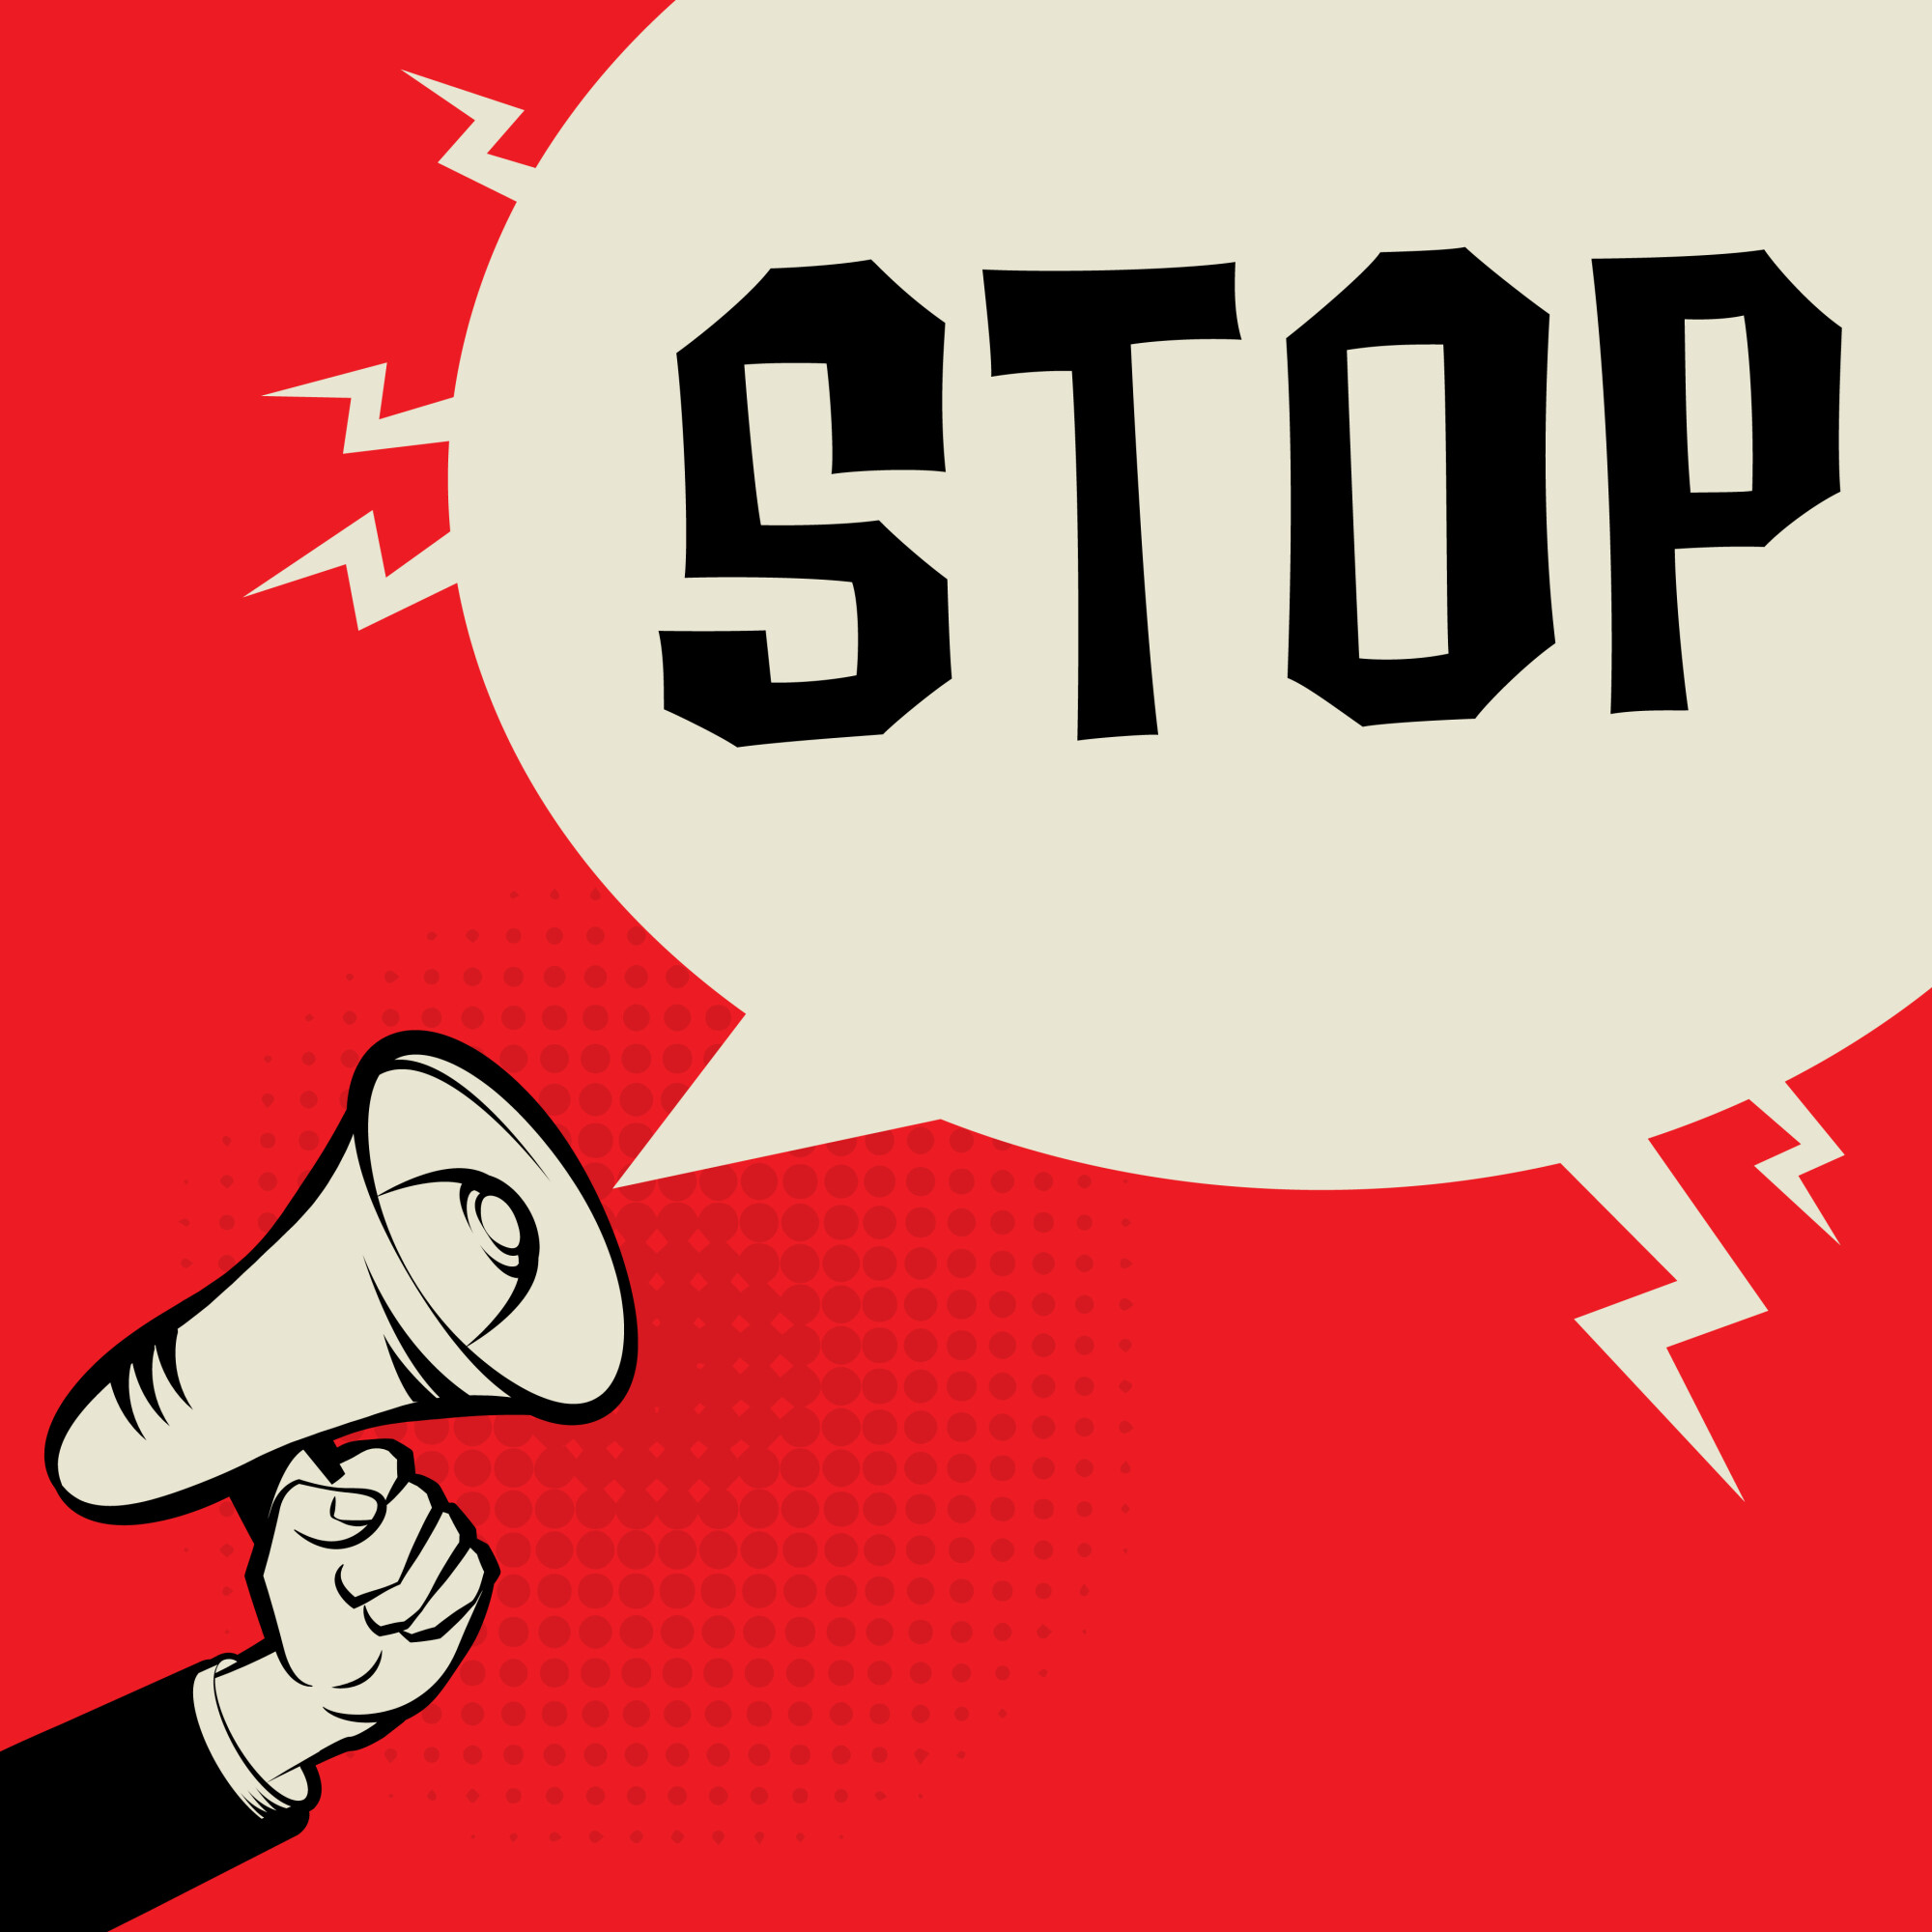 “STOP” in a word-bubble coming from a hand-held megaphone in front of a red background.